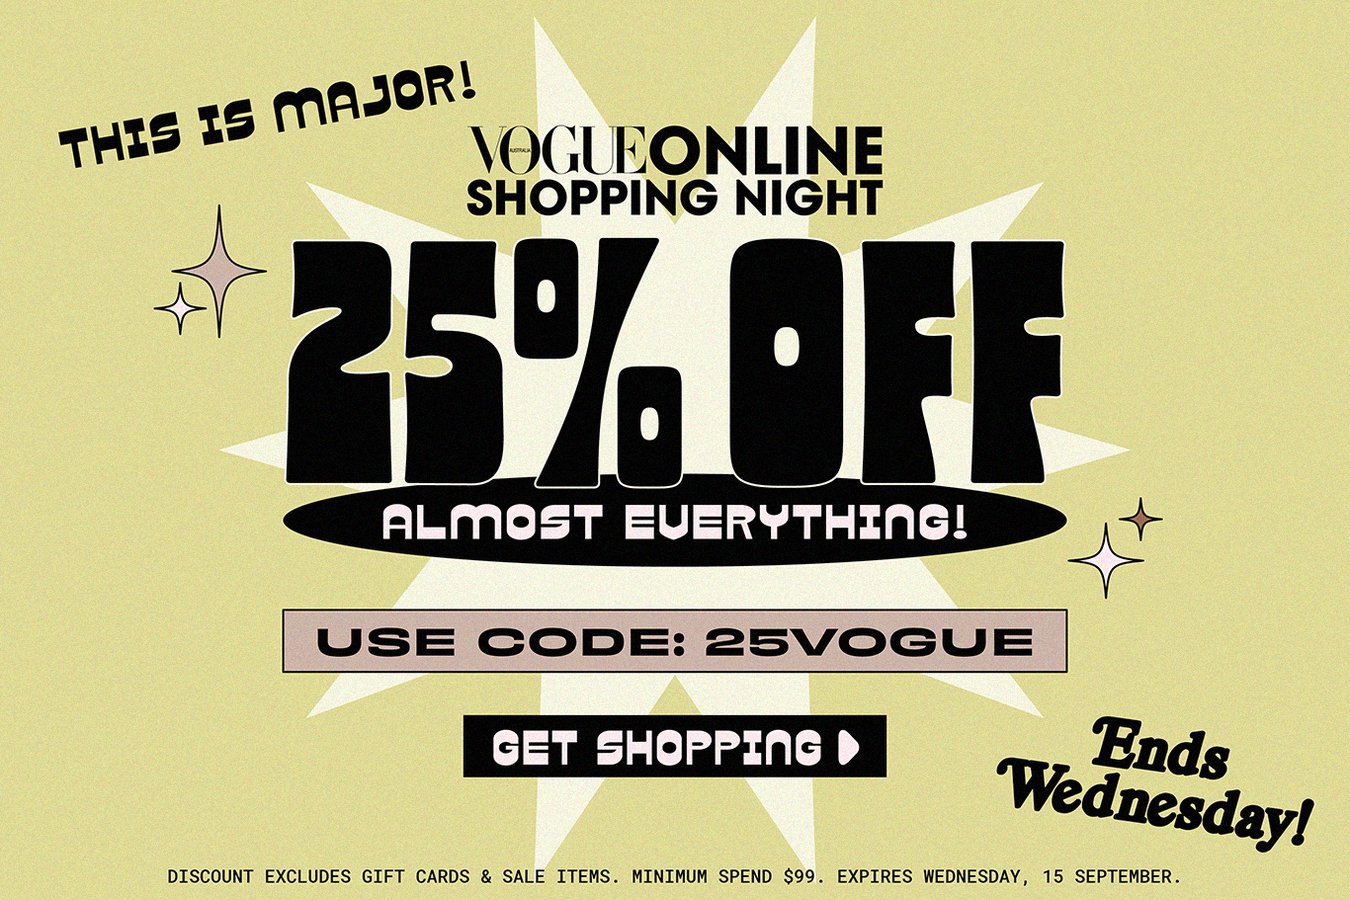 Extra 25% OFF on almost everything